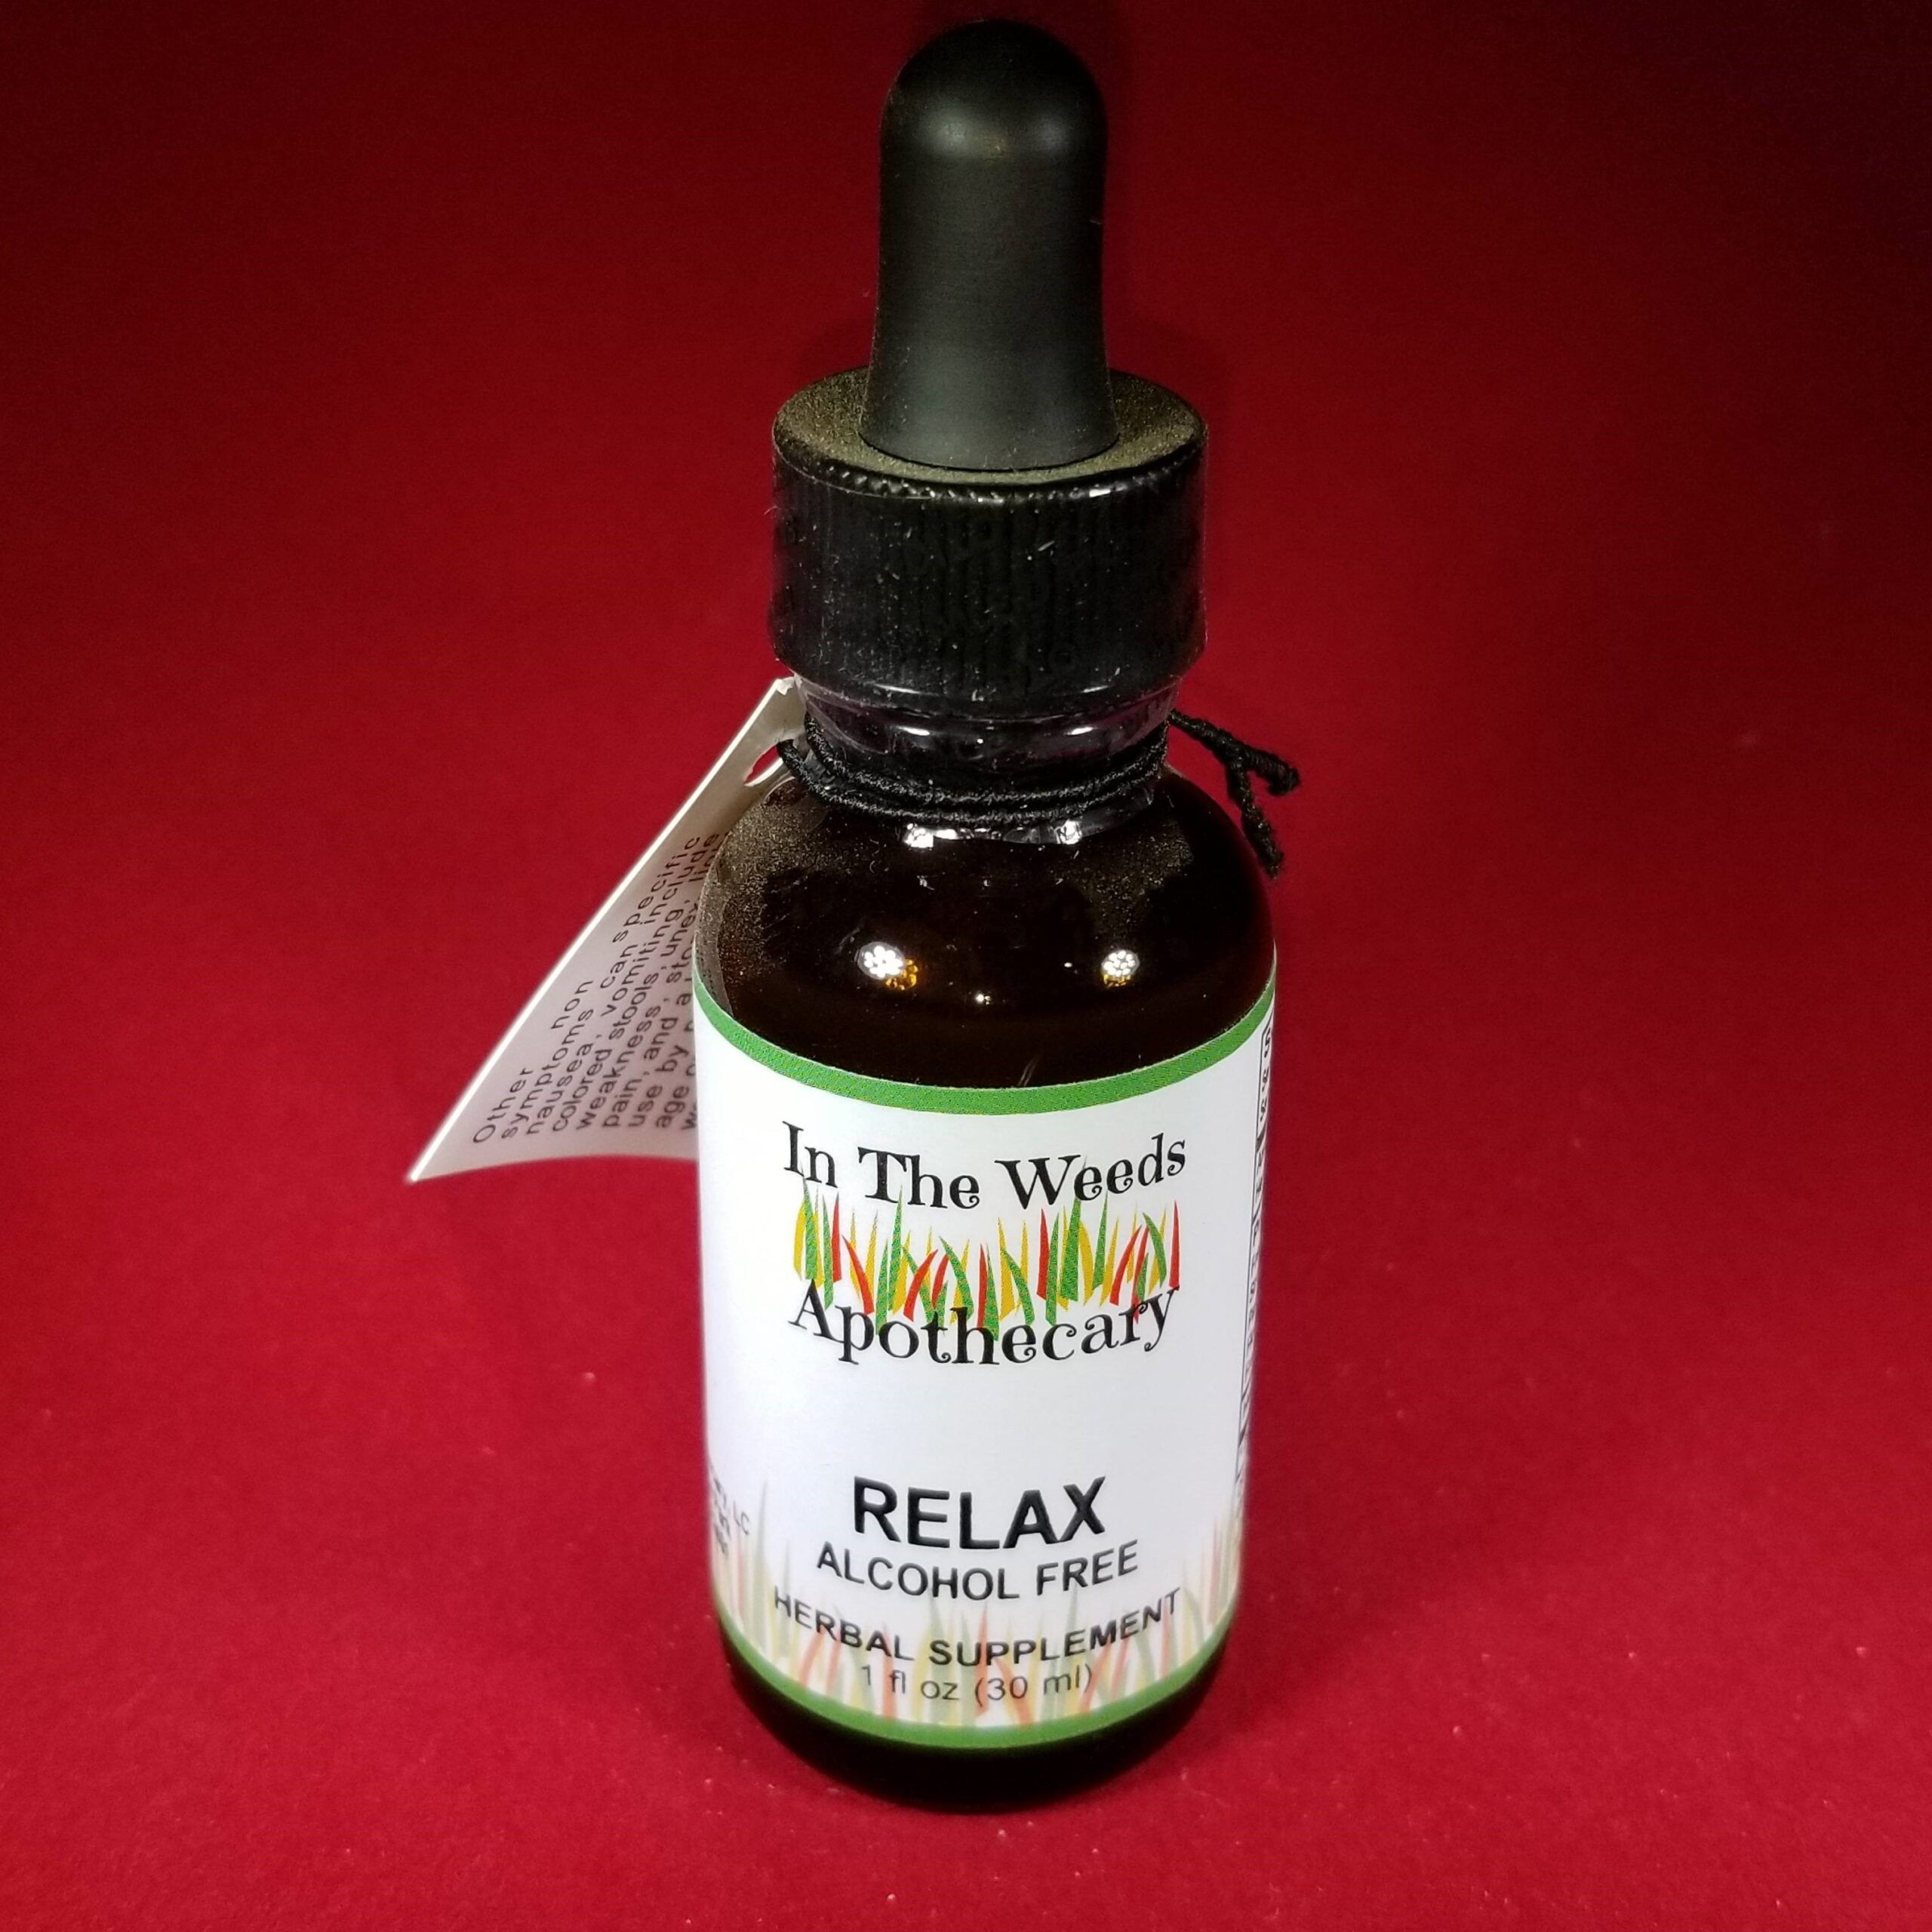 Relax/Alcohol Free Relax, 1 oz.